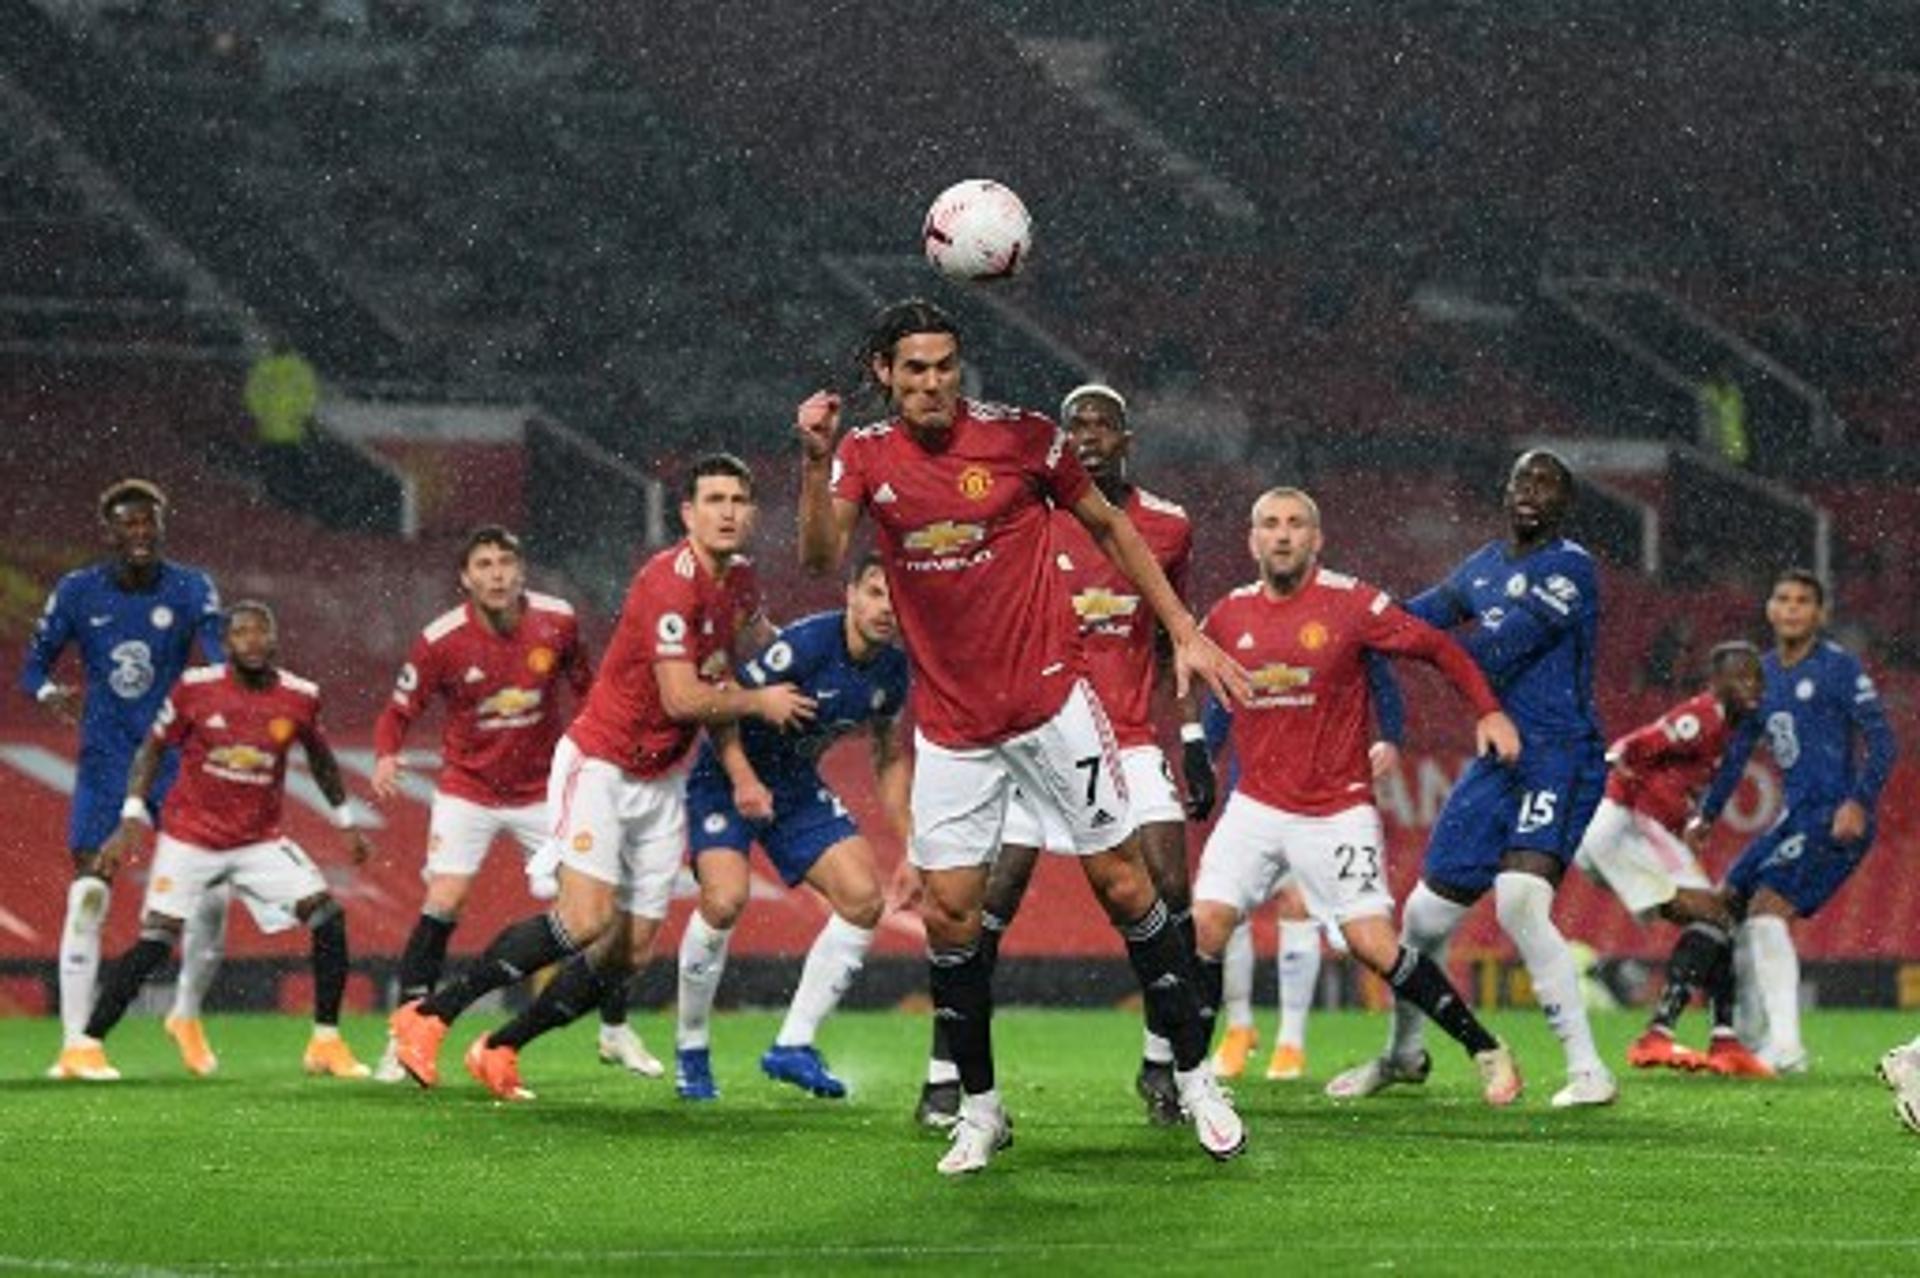 Manchester United x Chelsea